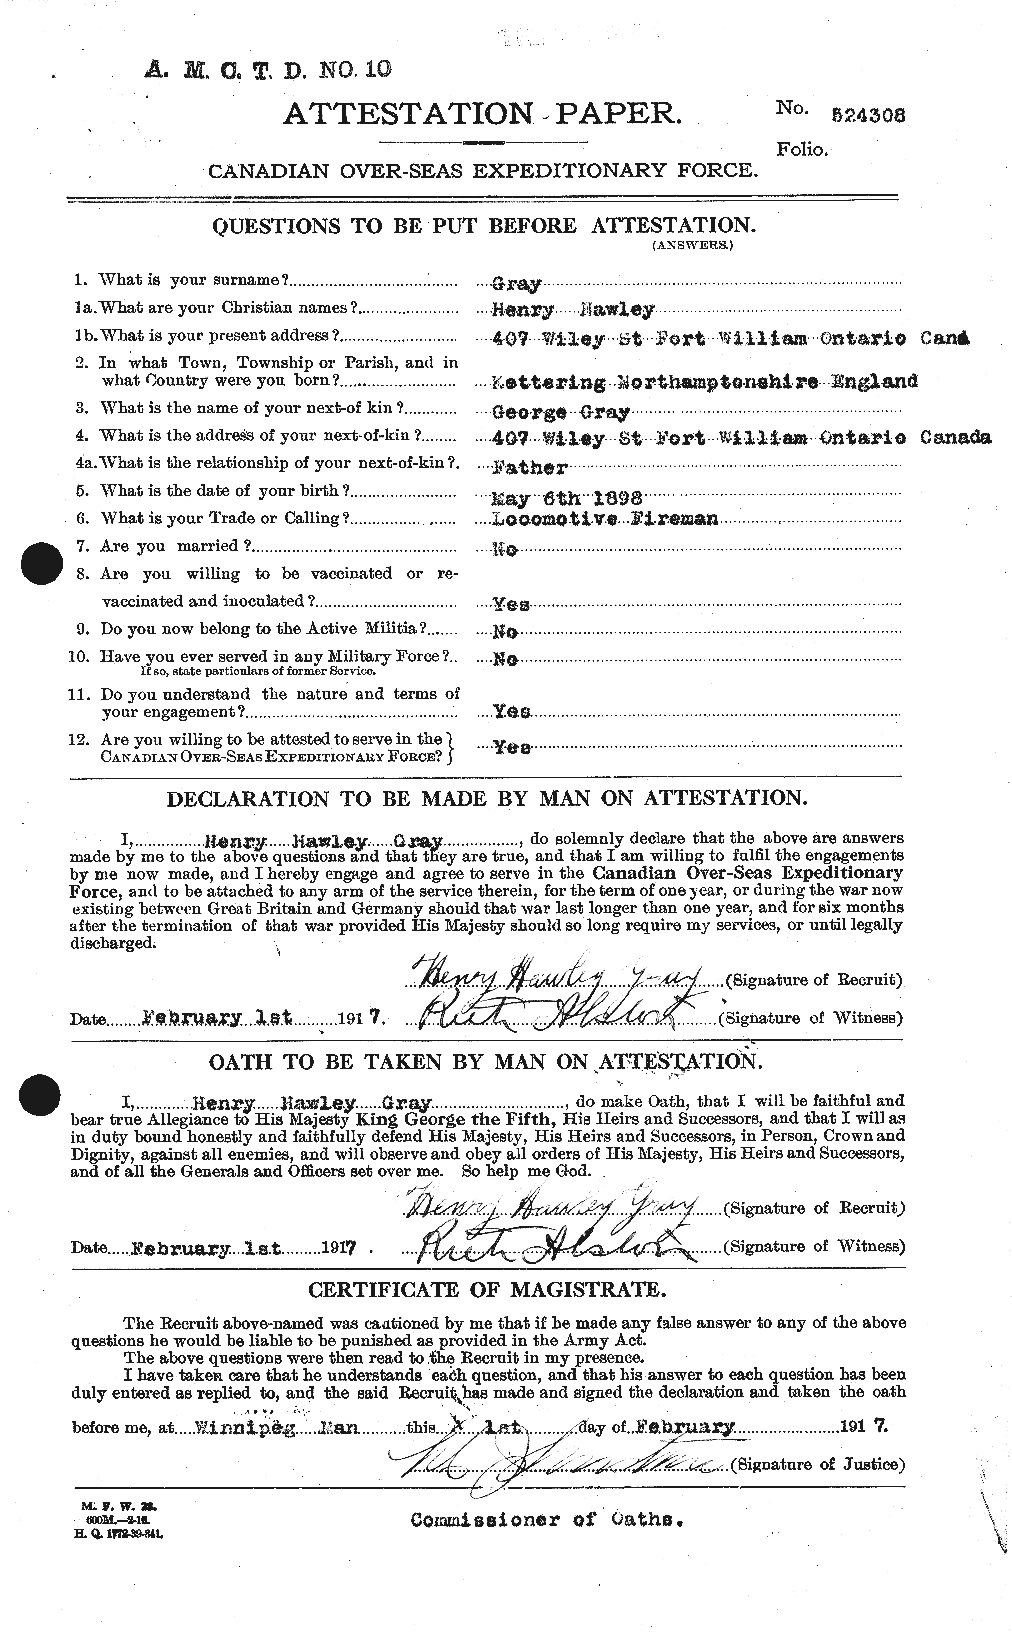 Personnel Records of the First World War - CEF 363230a